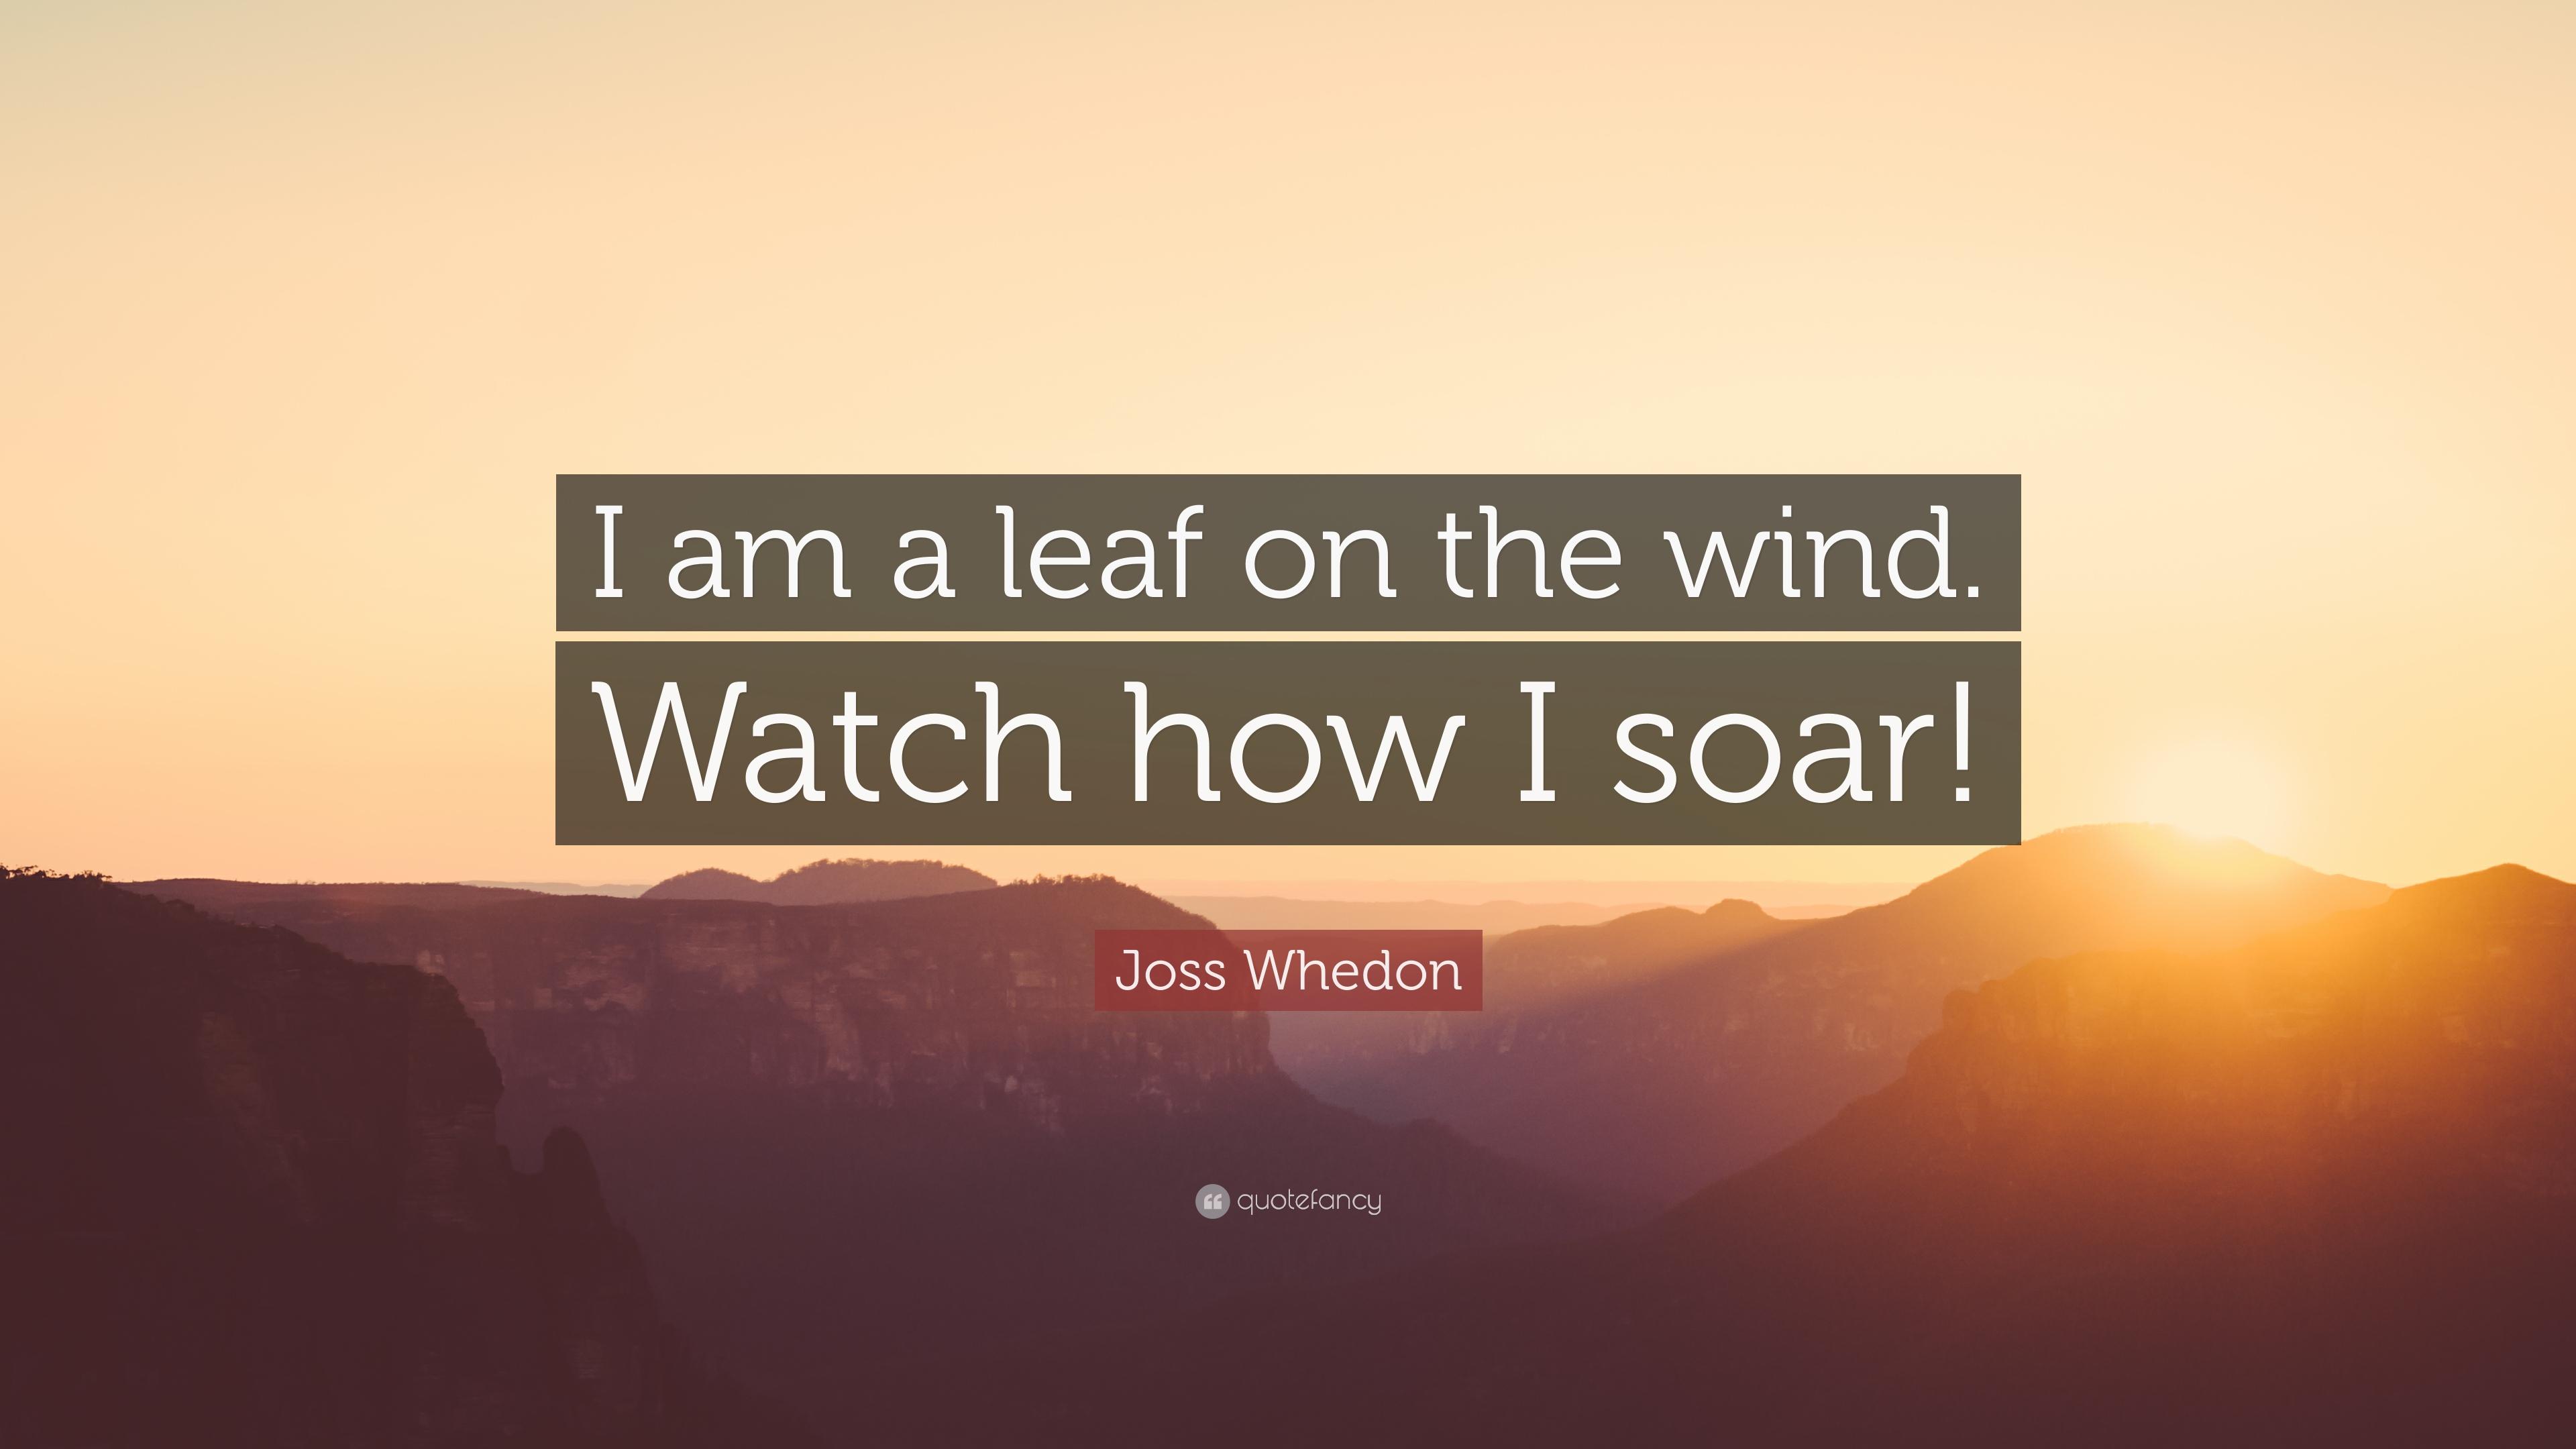 Joss Whedon Quote: "I am a leaf on the wind. 